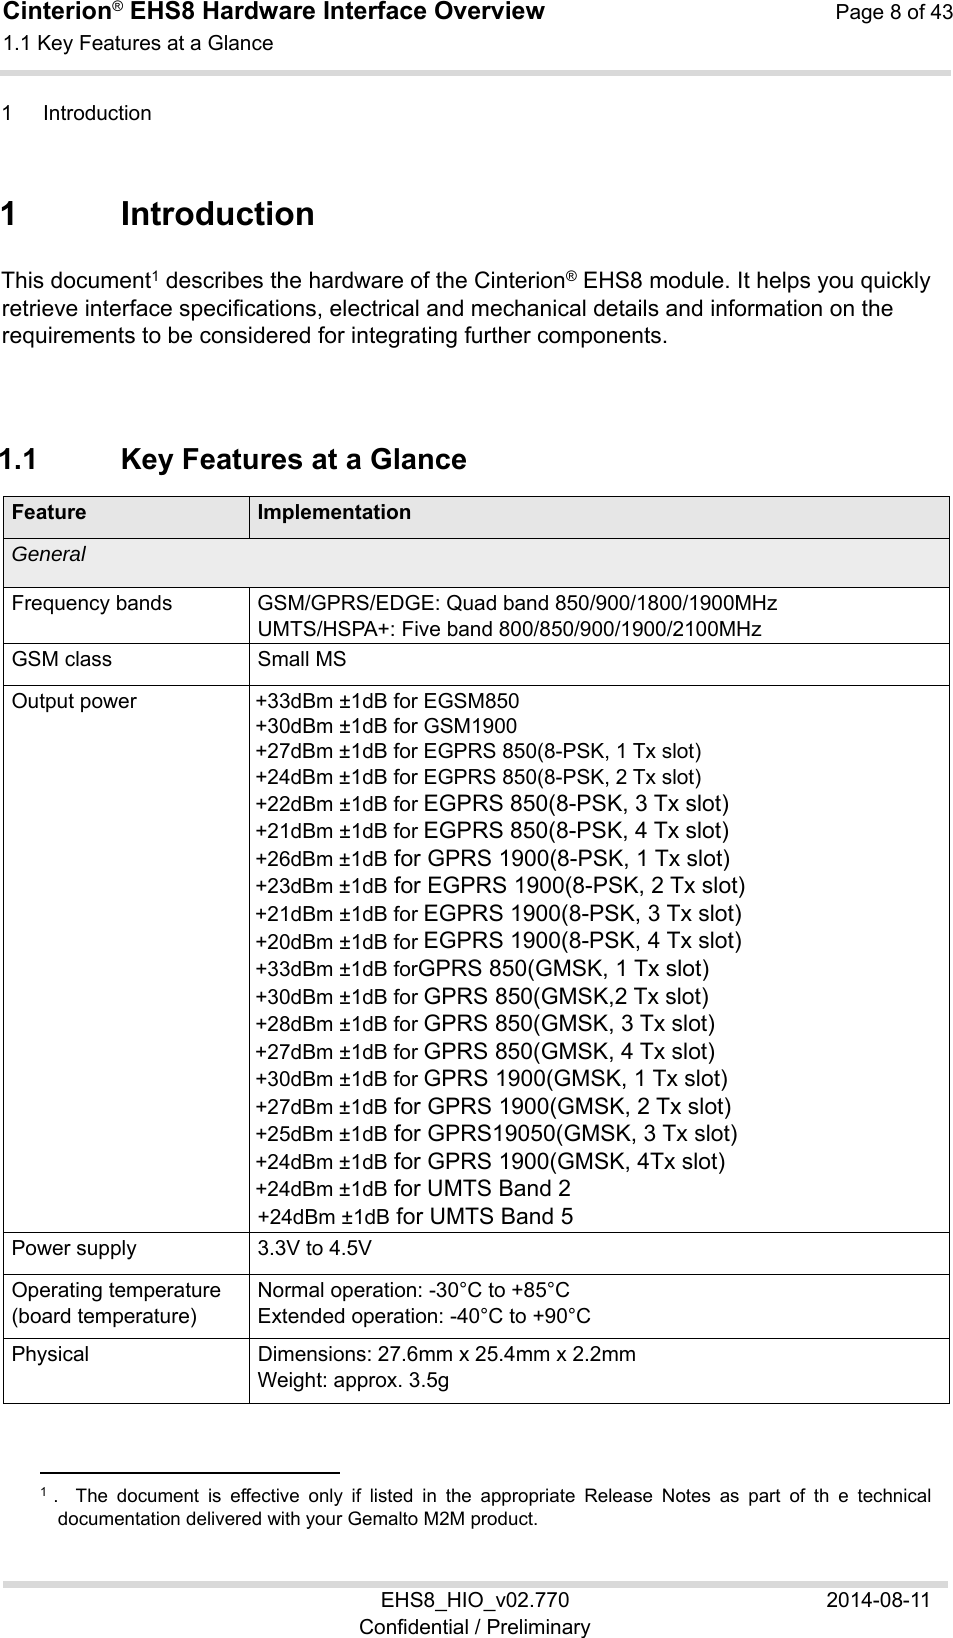 Cinterion® EHS8 Hardware Interface Overview  Page 8 of 43 1.1 Key Features at a Glance 11 EHS8_HIO_v02.770  2014-08-11 Confidential / Preliminary 1  Introduction 11 1  Introduction This document1 describes the hardware of the Cinterion® EHS8 module. It helps you quickly retrieve interface specifications, electrical and mechanical details and information on the requirements to be considered for integrating further components. 1.1  Key Features at a Glance Feature ImplementationGeneral  Frequency bands GSM/GPRS/EDGE: Quad band 850/900/1800/1900MHz UMTS/HSPA+: Five band 800/850/900/1900/2100MHz GSM class Small MS Output power +33dBm ±1dB for EGSM850 +30dBm ±1dB for GSM1900  +27dBm ±1dB for EGPRS 850(8-PSK, 1 Tx slot)  +24dBm ±1dB for EGPRS 850(8-PSK, 2 Tx slot)  +22dBm ±1dB for EGPRS 850(8-PSK, 3 Tx slot)  +21dBm ±1dB for EGPRS 850(8-PSK, 4 Tx slot)  +26dBm ±1dB for GPRS 1900(8-PSK, 1 Tx slot) +23dBm ±1dB for EGPRS 1900(8-PSK, 2 Tx slot)  +21dBm ±1dB for EGPRS 1900(8-PSK, 3 Tx slot)  +20dBm ±1dB for EGPRS 1900(8-PSK, 4 Tx slot)  +33dBm ±1dB forGPRS 850(GMSK, 1 Tx slot)  +30dBm ±1dB for GPRS 850(GMSK,2 Tx slot)  +28dBm ±1dB for GPRS 850(GMSK, 3 Tx slot)  +27dBm ±1dB for GPRS 850(GMSK, 4 Tx slot) +30dBm ±1dB for GPRS 1900(GMSK, 1 Tx slot) +27dBm ±1dB for GPRS 1900(GMSK, 2 Tx slot) +25dBm ±1dB for GPRS19050(GMSK, 3 Tx slot) +24dBm ±1dB for GPRS 1900(GMSK, 4Tx slot) +24dBm ±1dB for UMTS Band 2 +24dBm ±1dB for UMTS Band 5 Power supply 3.3V to 4.5VOperating temperature (board temperature) Normal operation: -30°C to +85°C Extended operation: -40°C to +90°C Physical Dimensions: 27.6mm x 25.4mm x 2.2mm Weight: approx. 3.5g                                                  1  .    The  document  is  effective  only  if  listed  in  the  appropriate  Release  Notes  as  part  of  th  e  technical documentation delivered with your Gemalto M2M product. 